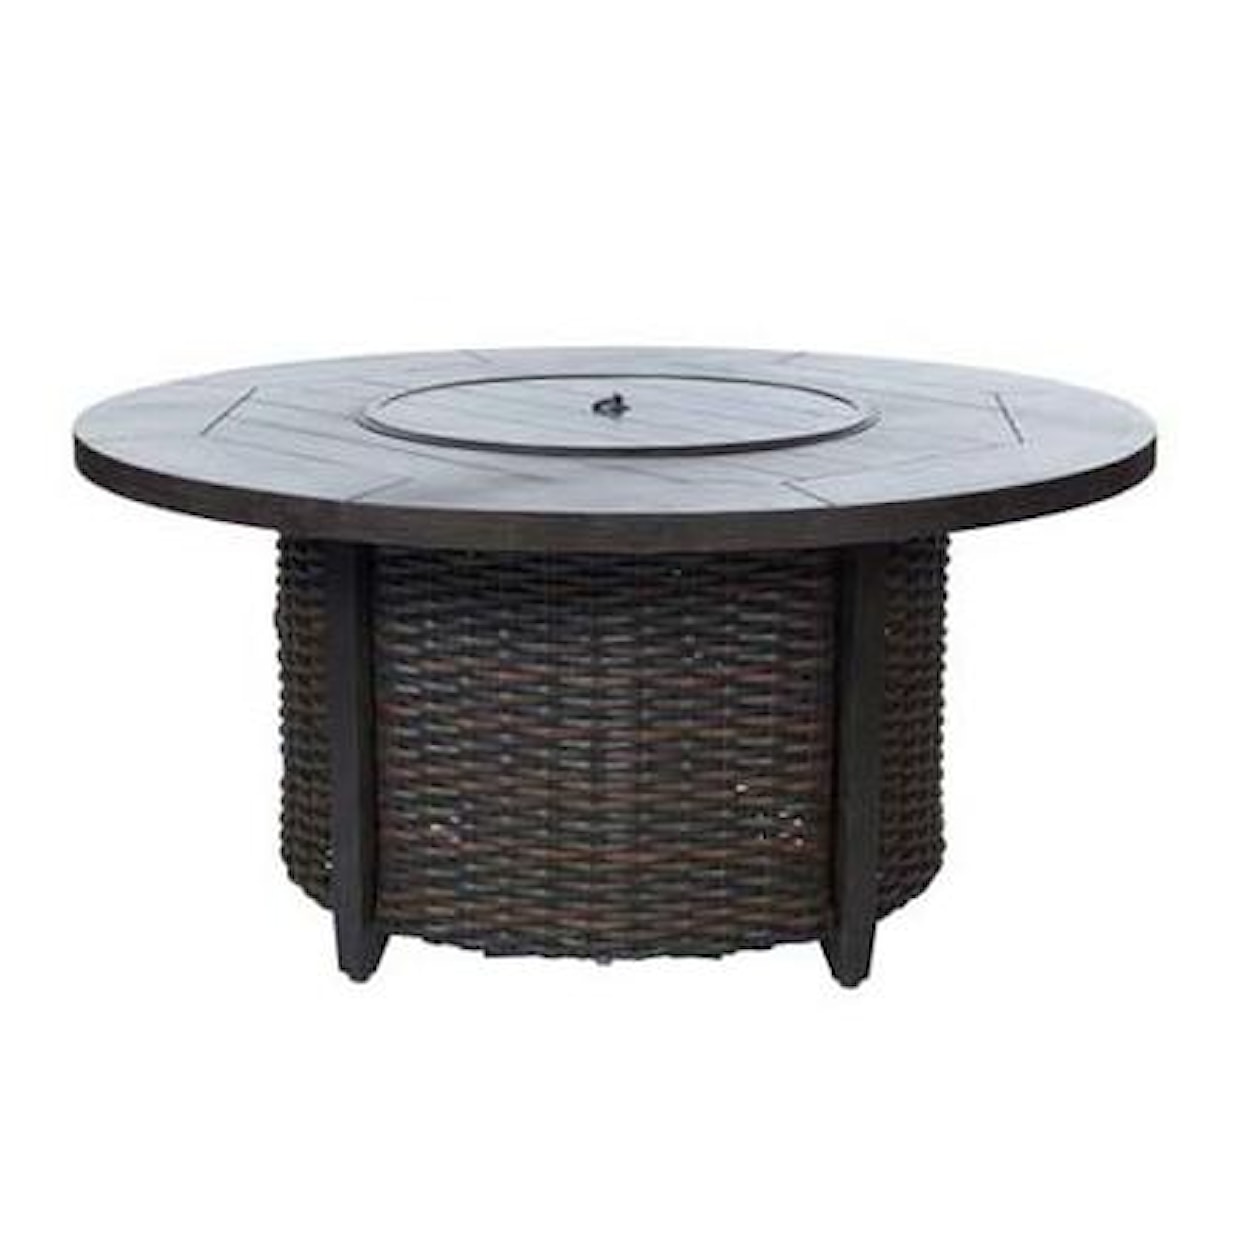 Ebel Fire Pits Fire Pit with Woven Base